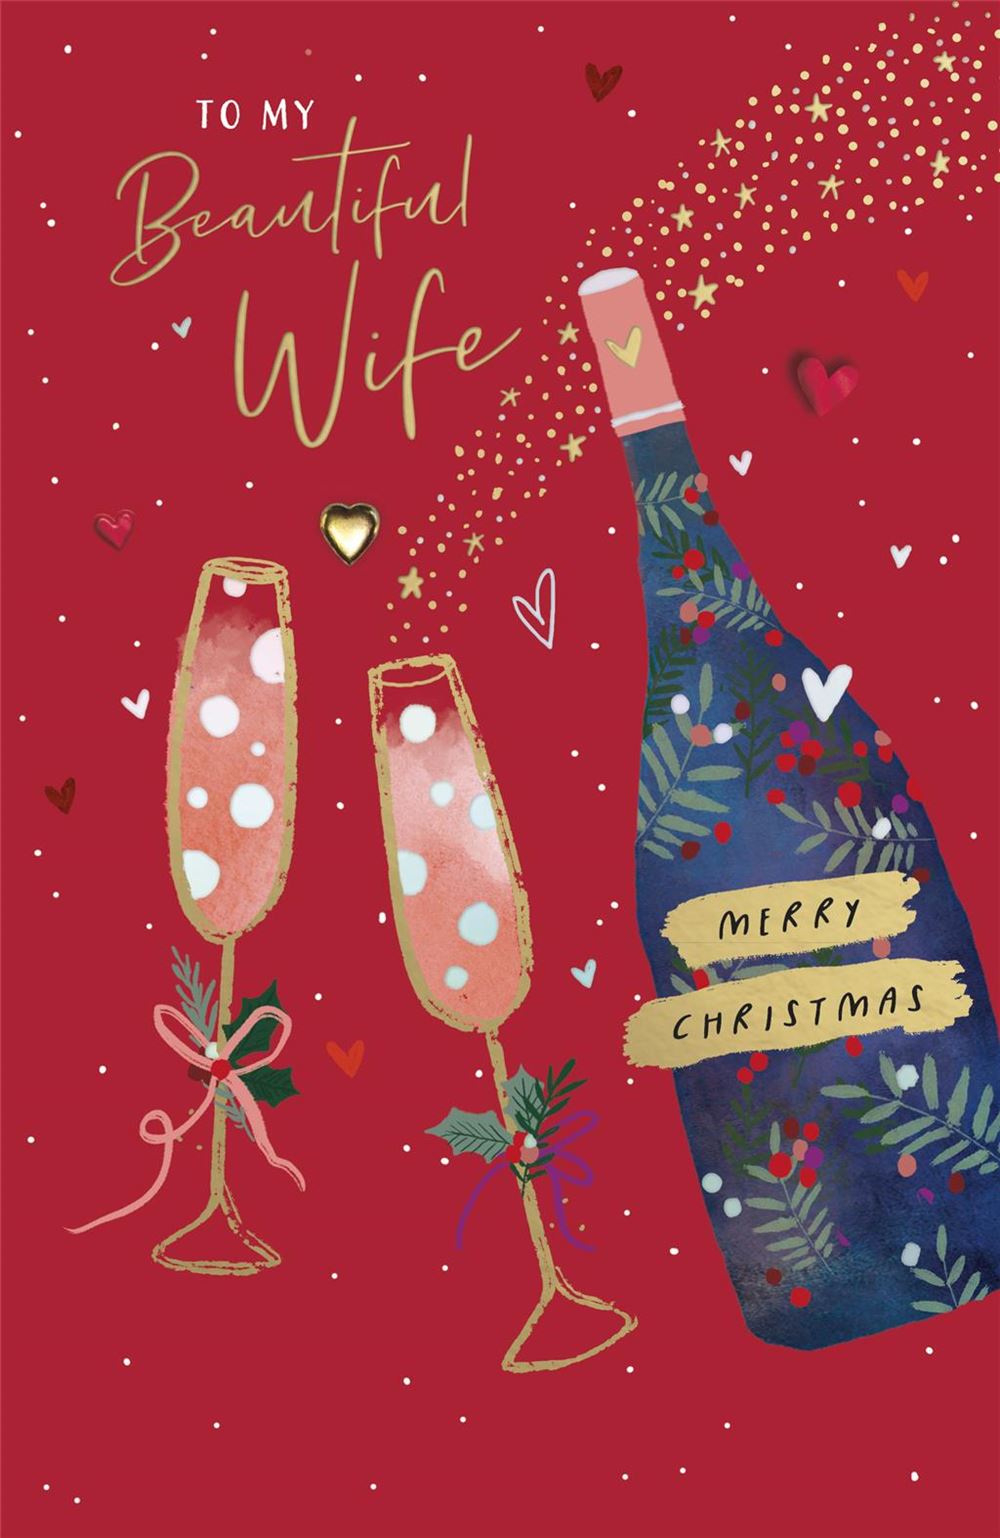 Wife Christmas Cards - Champagne Bottle and Flutes